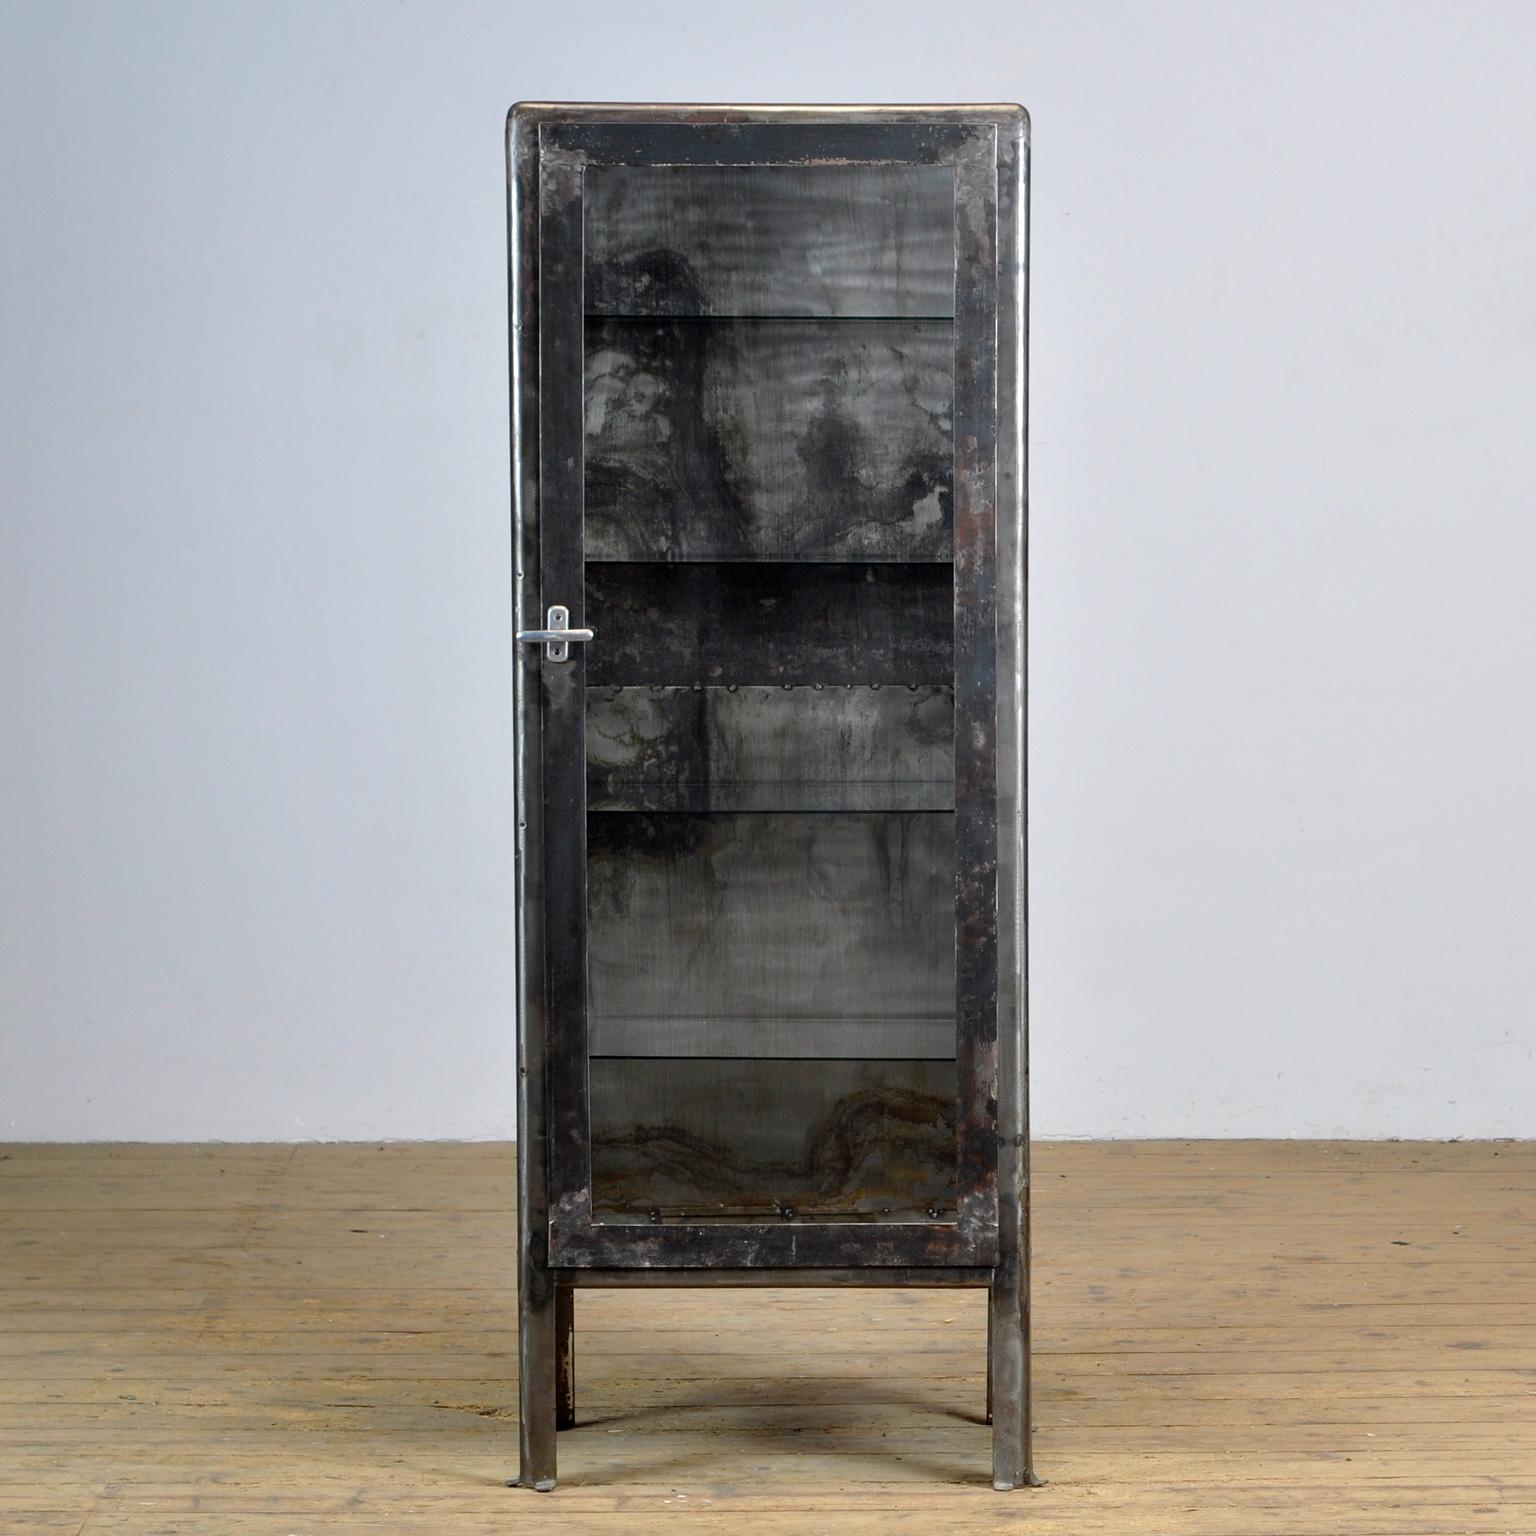 Iron medical cabinet from Ukraine. Produced in the 1970s.
The cabinet has been stripped down to the metal. The cabinet comes with 4 glass shelves.
Space between the shelves is 28 cm.